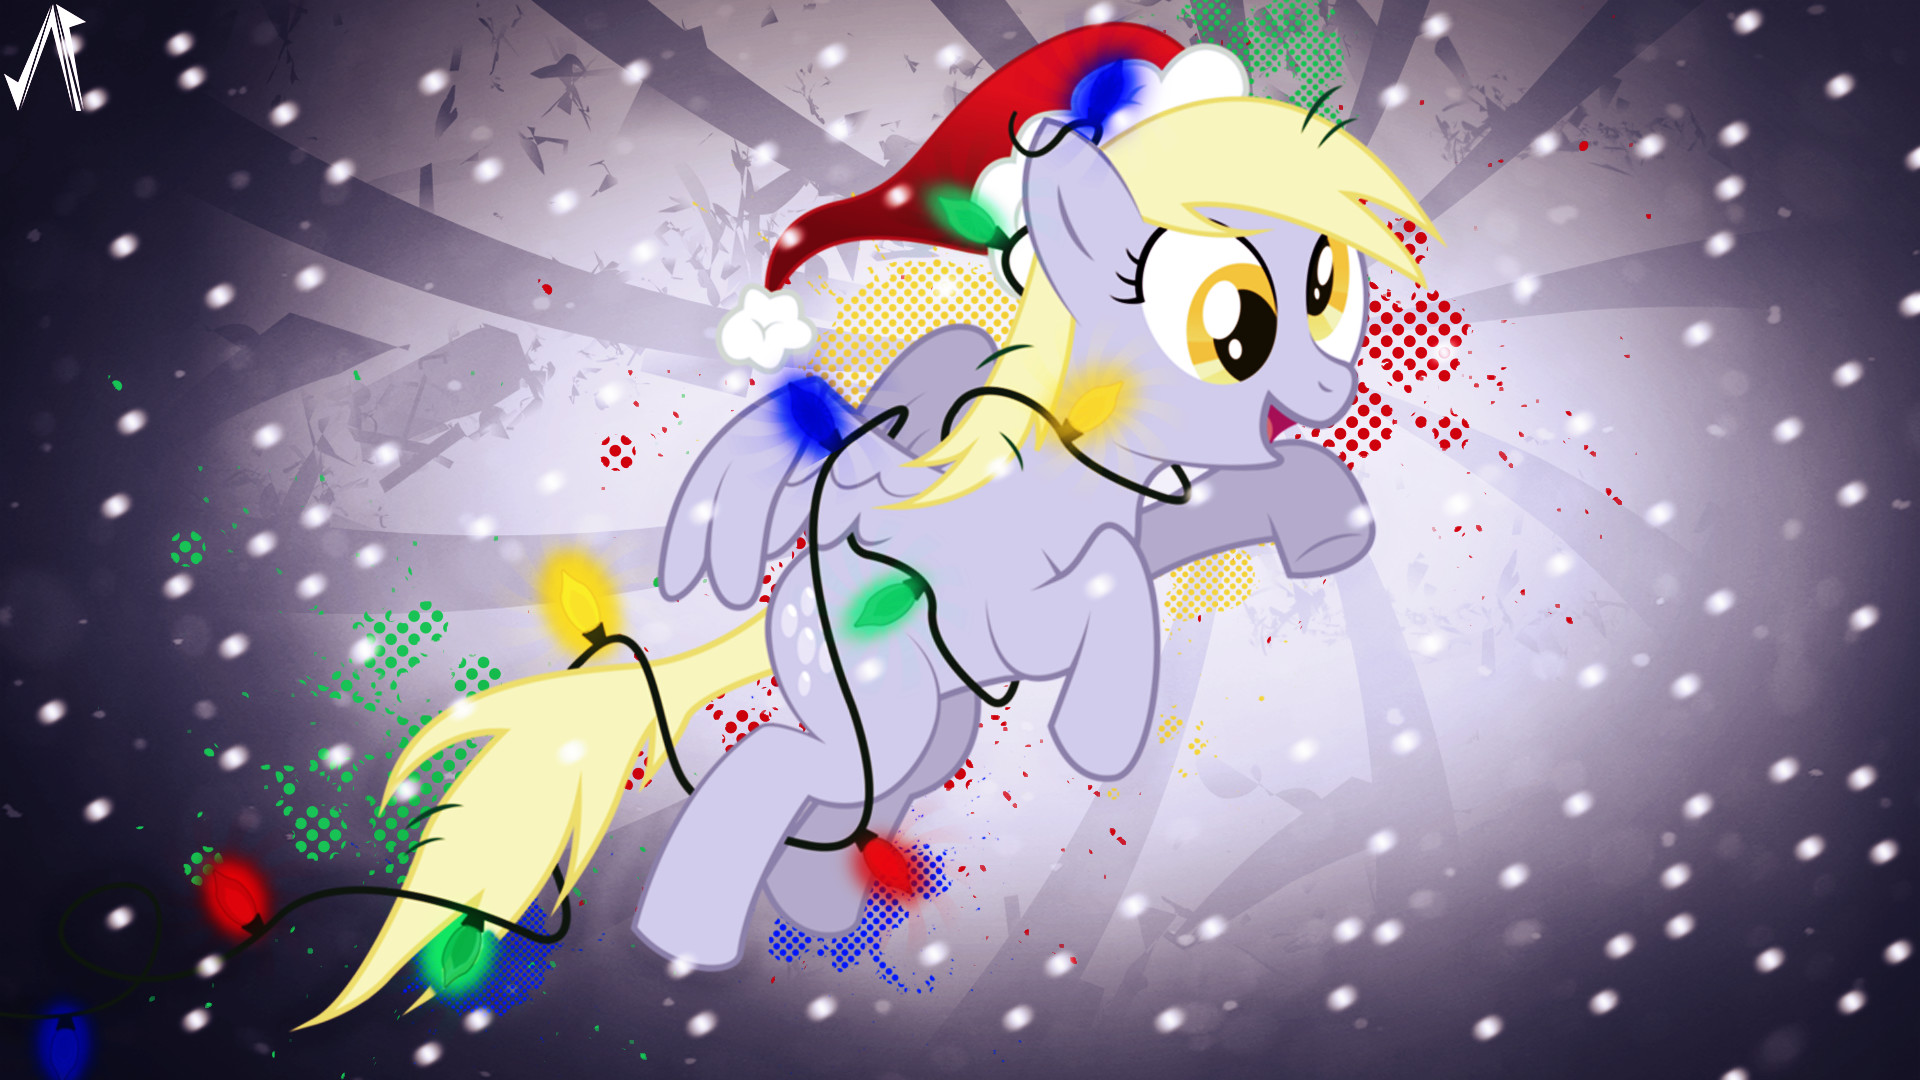 1920x1080 A Derpy Chistmas by JustaninnocentPony A Derpy Chistmas by  JustaninnocentPony